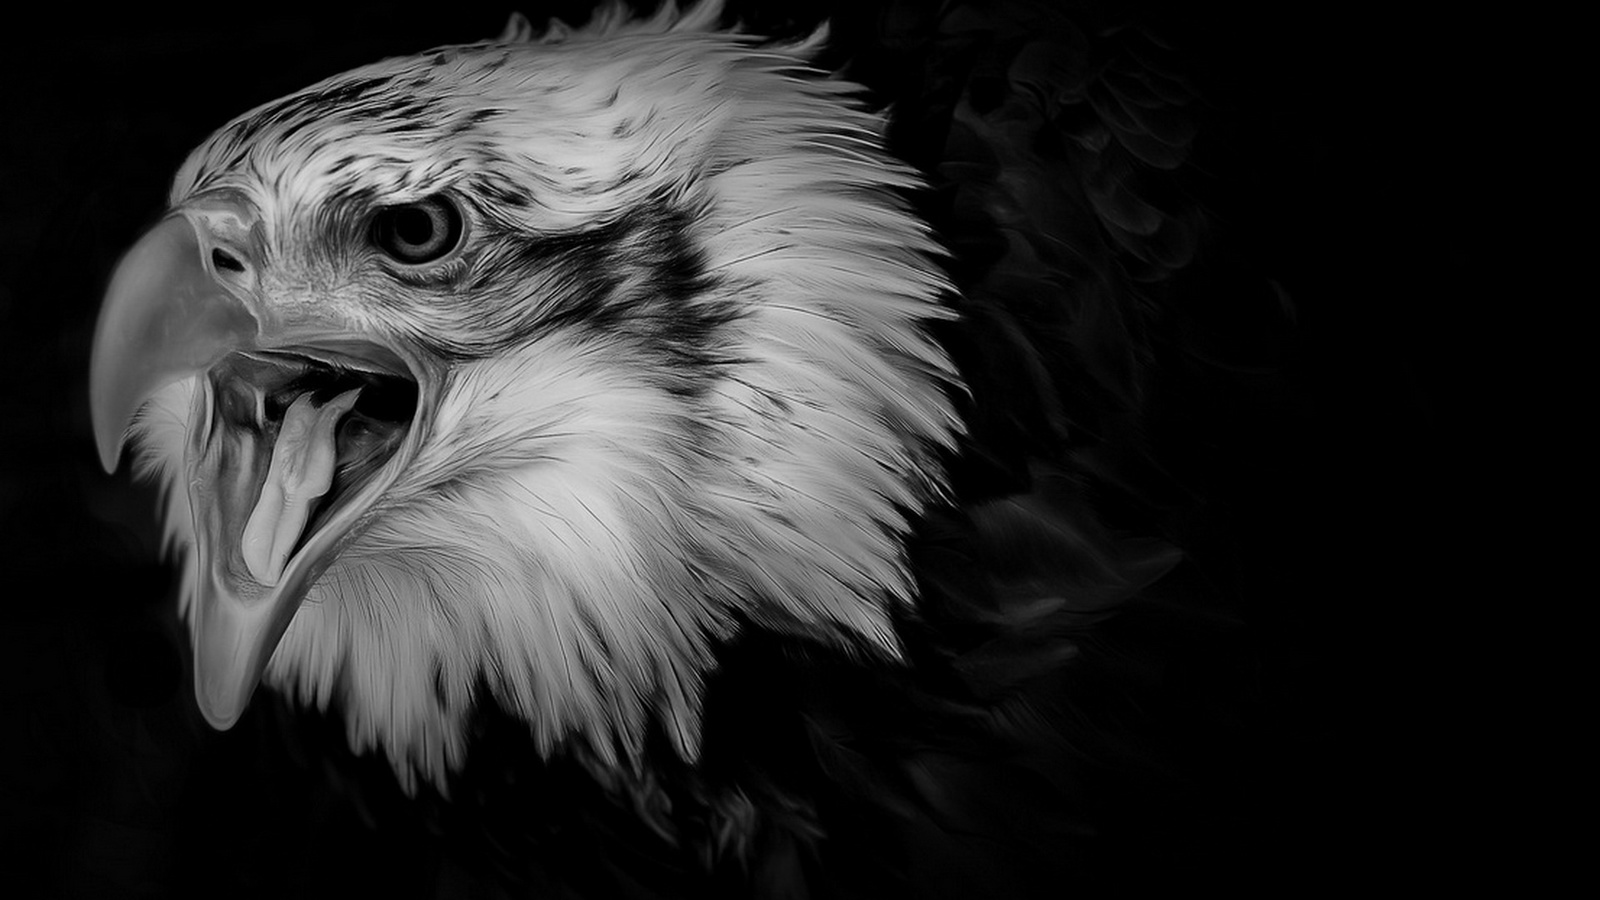 Wallpaper : 2900x2200 px, abstract, Albania, black, eagle, red 2900x2200 -  wallup - 1420429 - HD Wallpapers - WallHere